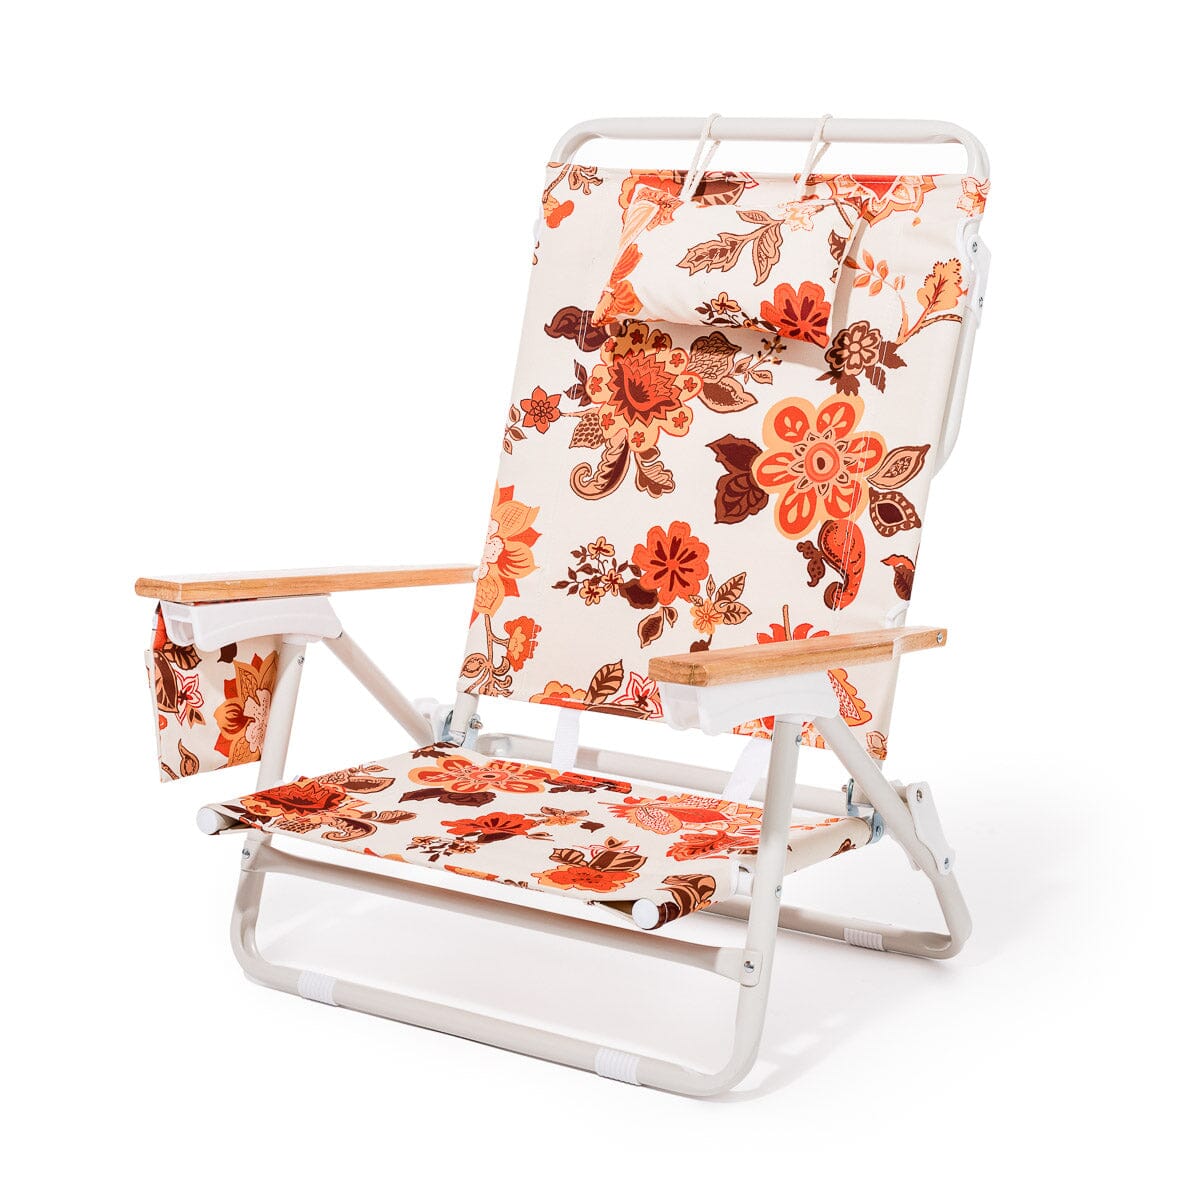 The Holiday Tommy Chair - Paisley Bay Holiday Tommy Chair Business & Pleasure Co. 